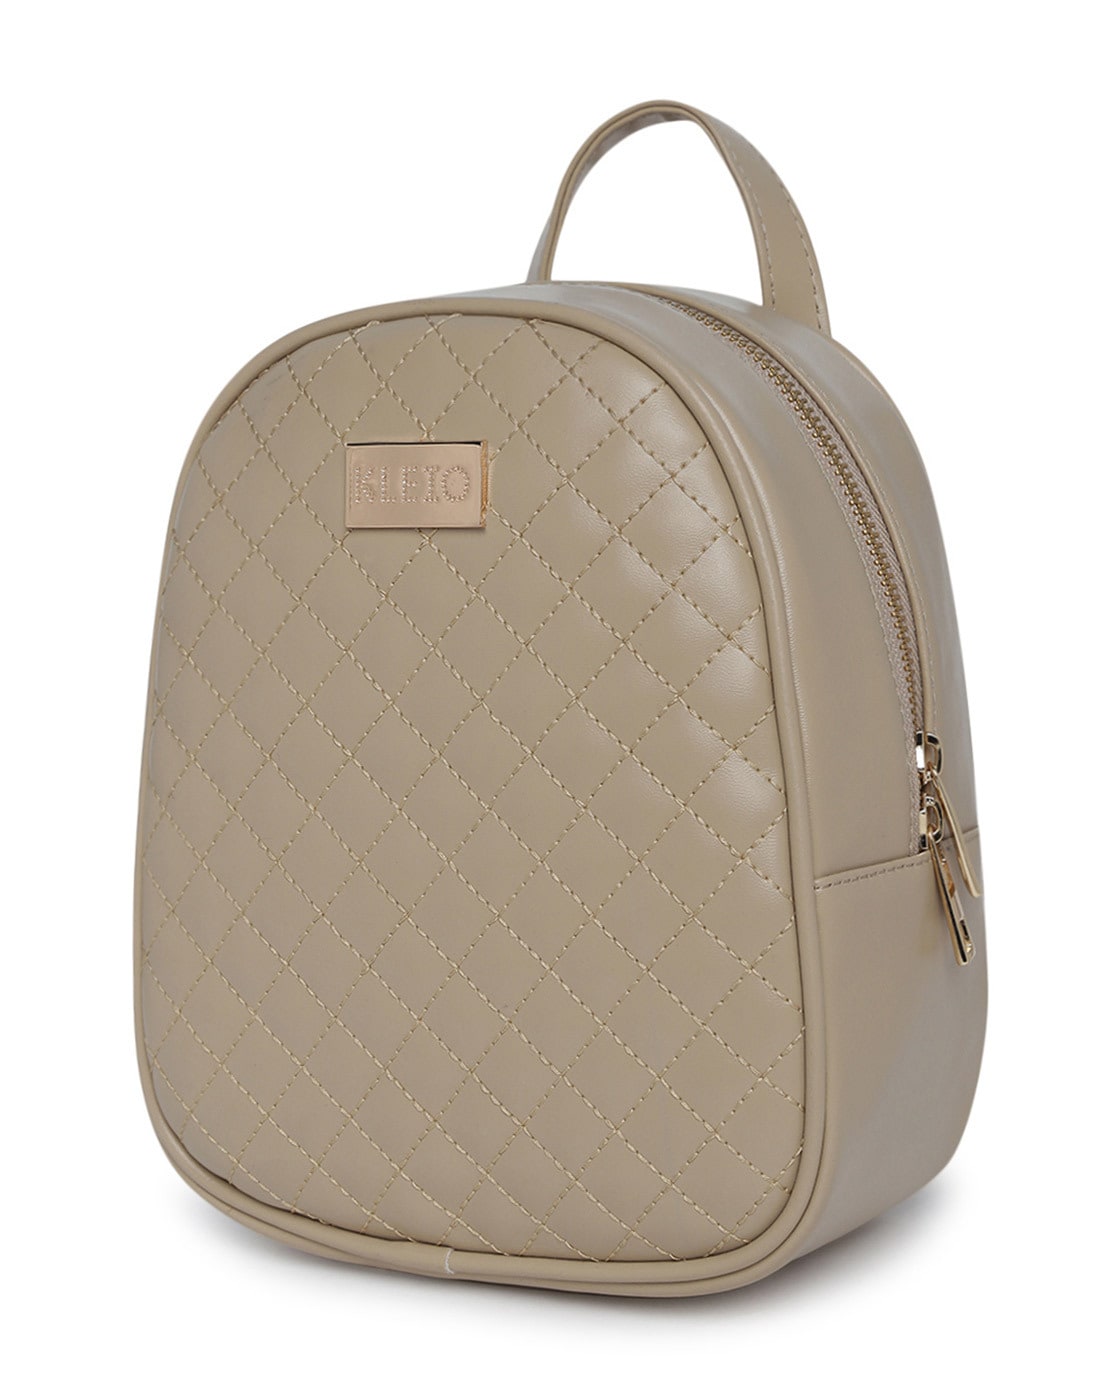 KLEIO Quilted Multifunctional Backpack and Sling Bag For Women: Buy KLEIO  Quilted Multifunctional Backpack and Sling Bag For Women Online at Best  Price in India